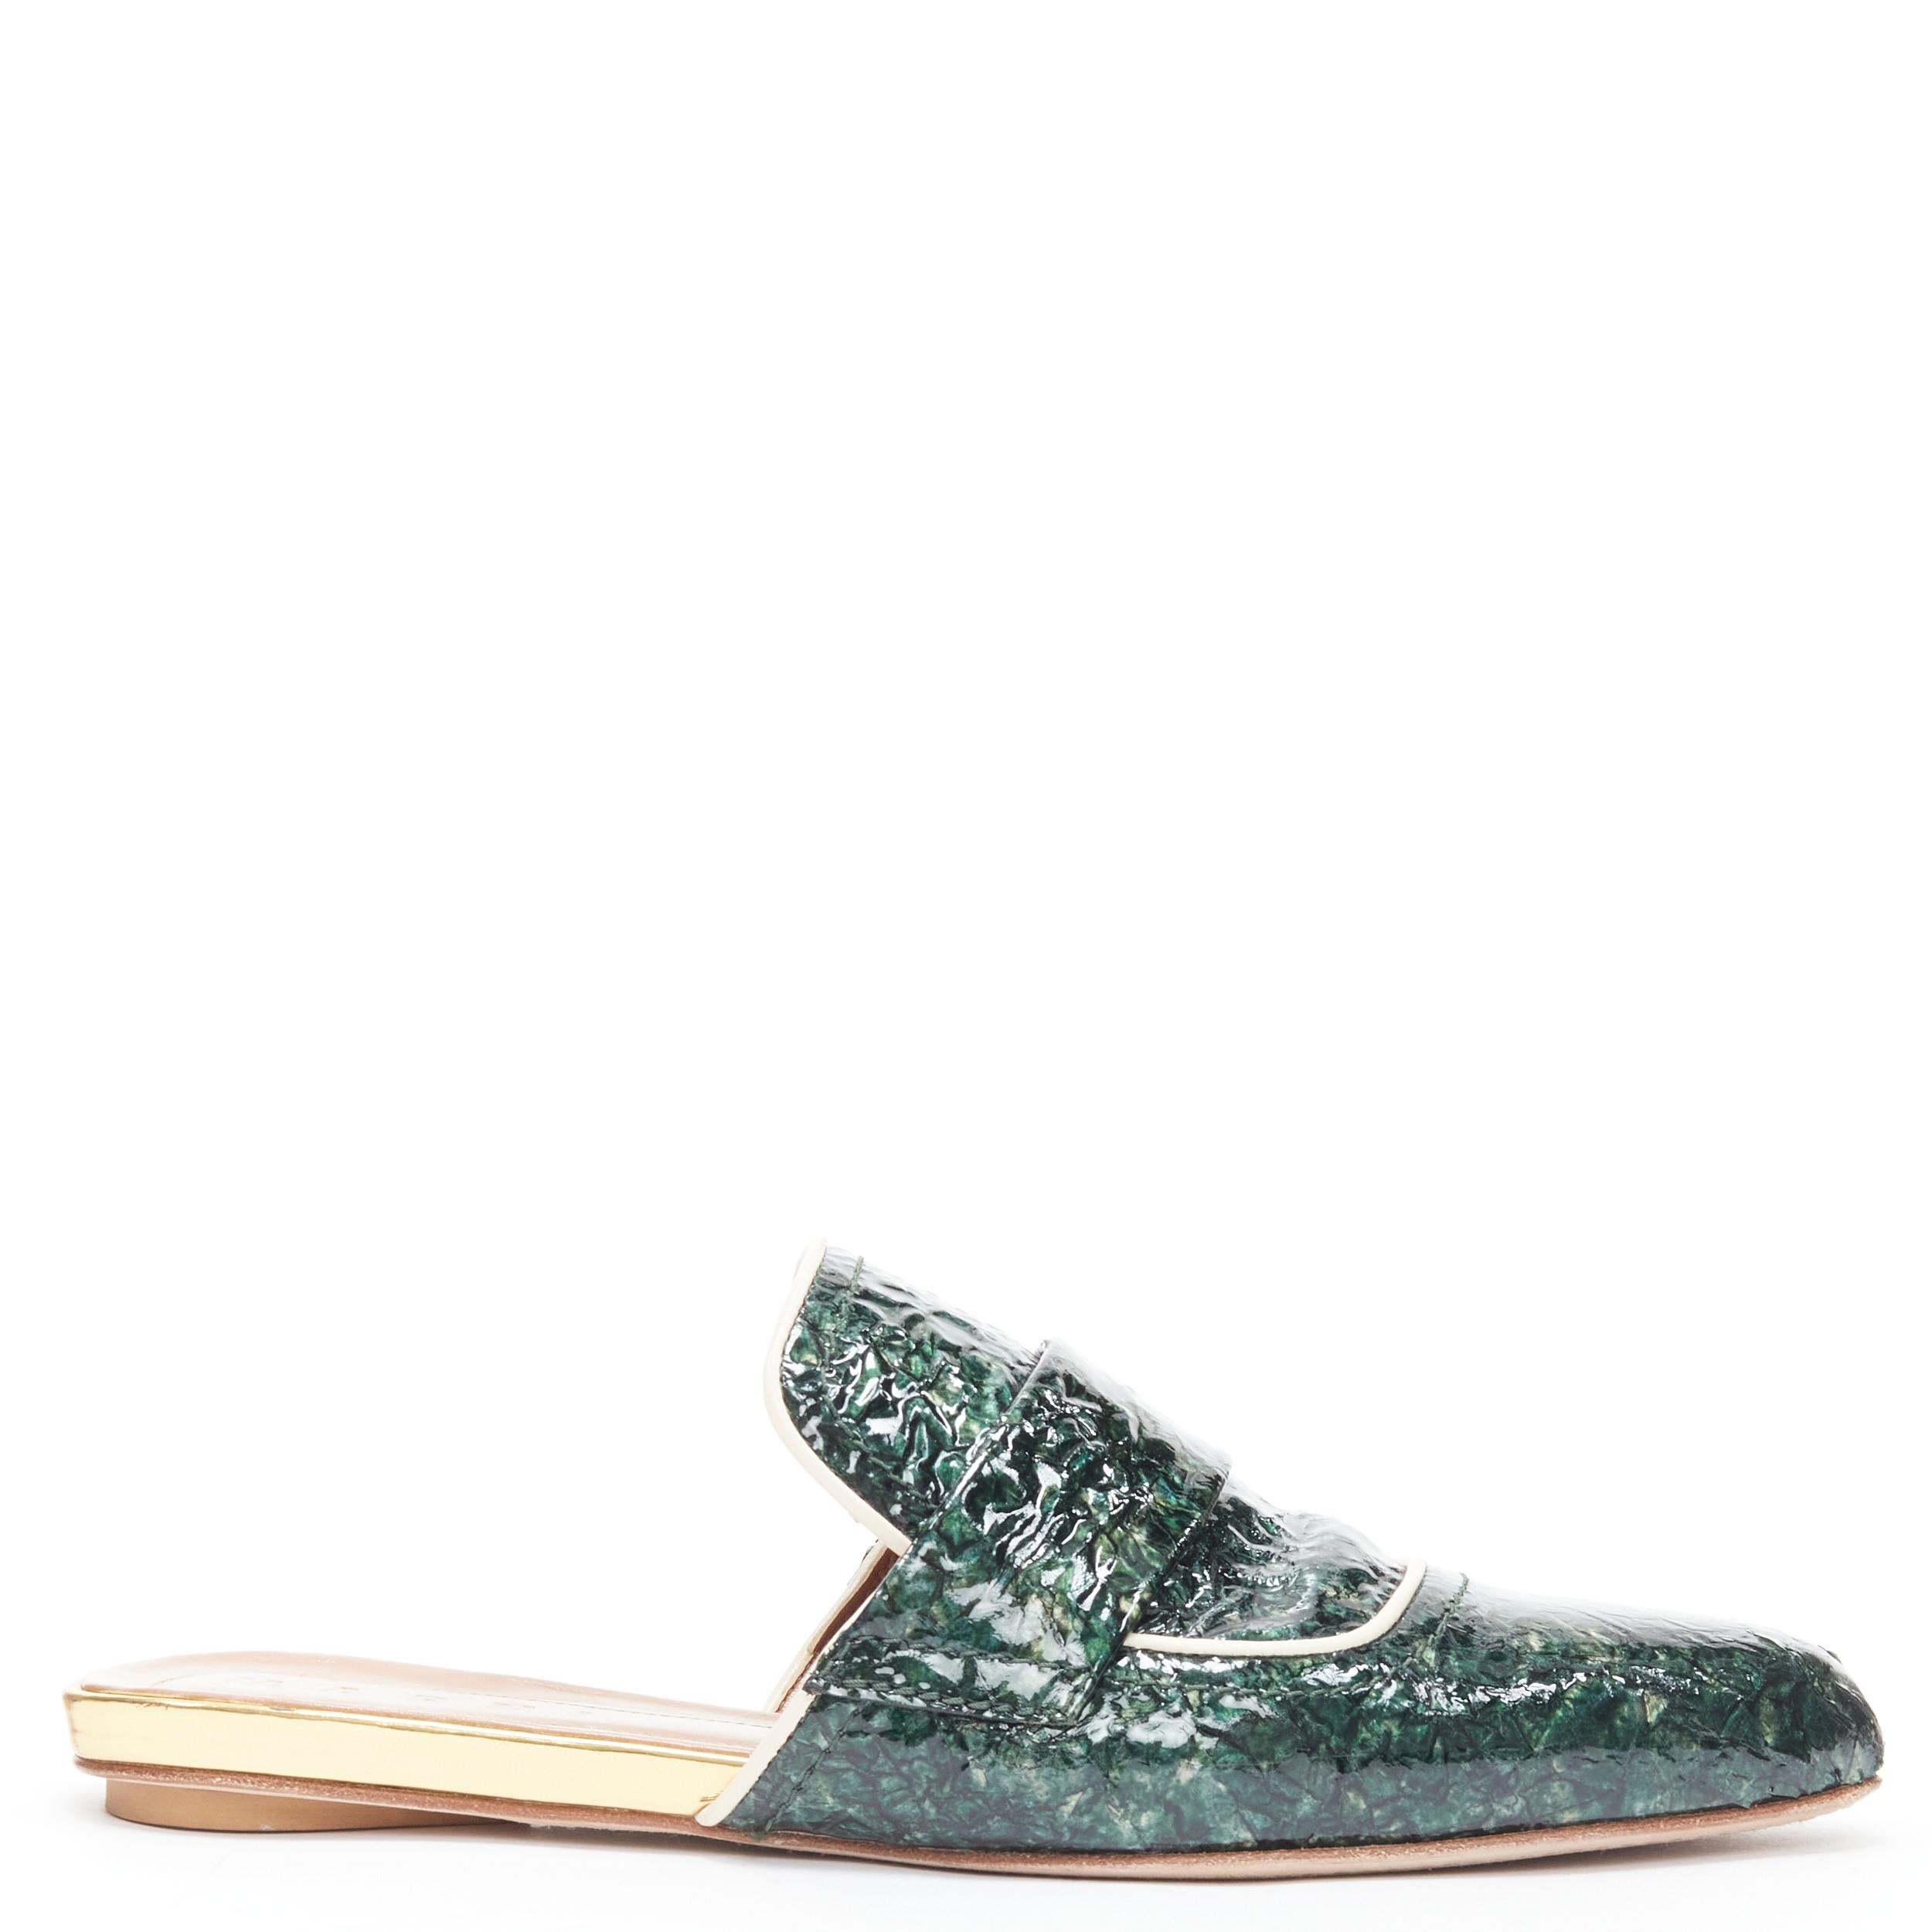 MARNI green crinkled patent point toe slip on mule flats loafer EU37.5 
Reference: CELG/A00230 
Brand: Marni 
Material: Patent Leather 
Color: Green 
Pattern: Solid 
Made in: Italy 

CONDITION: 
Condition: Excellent, this item was pre-owned and is